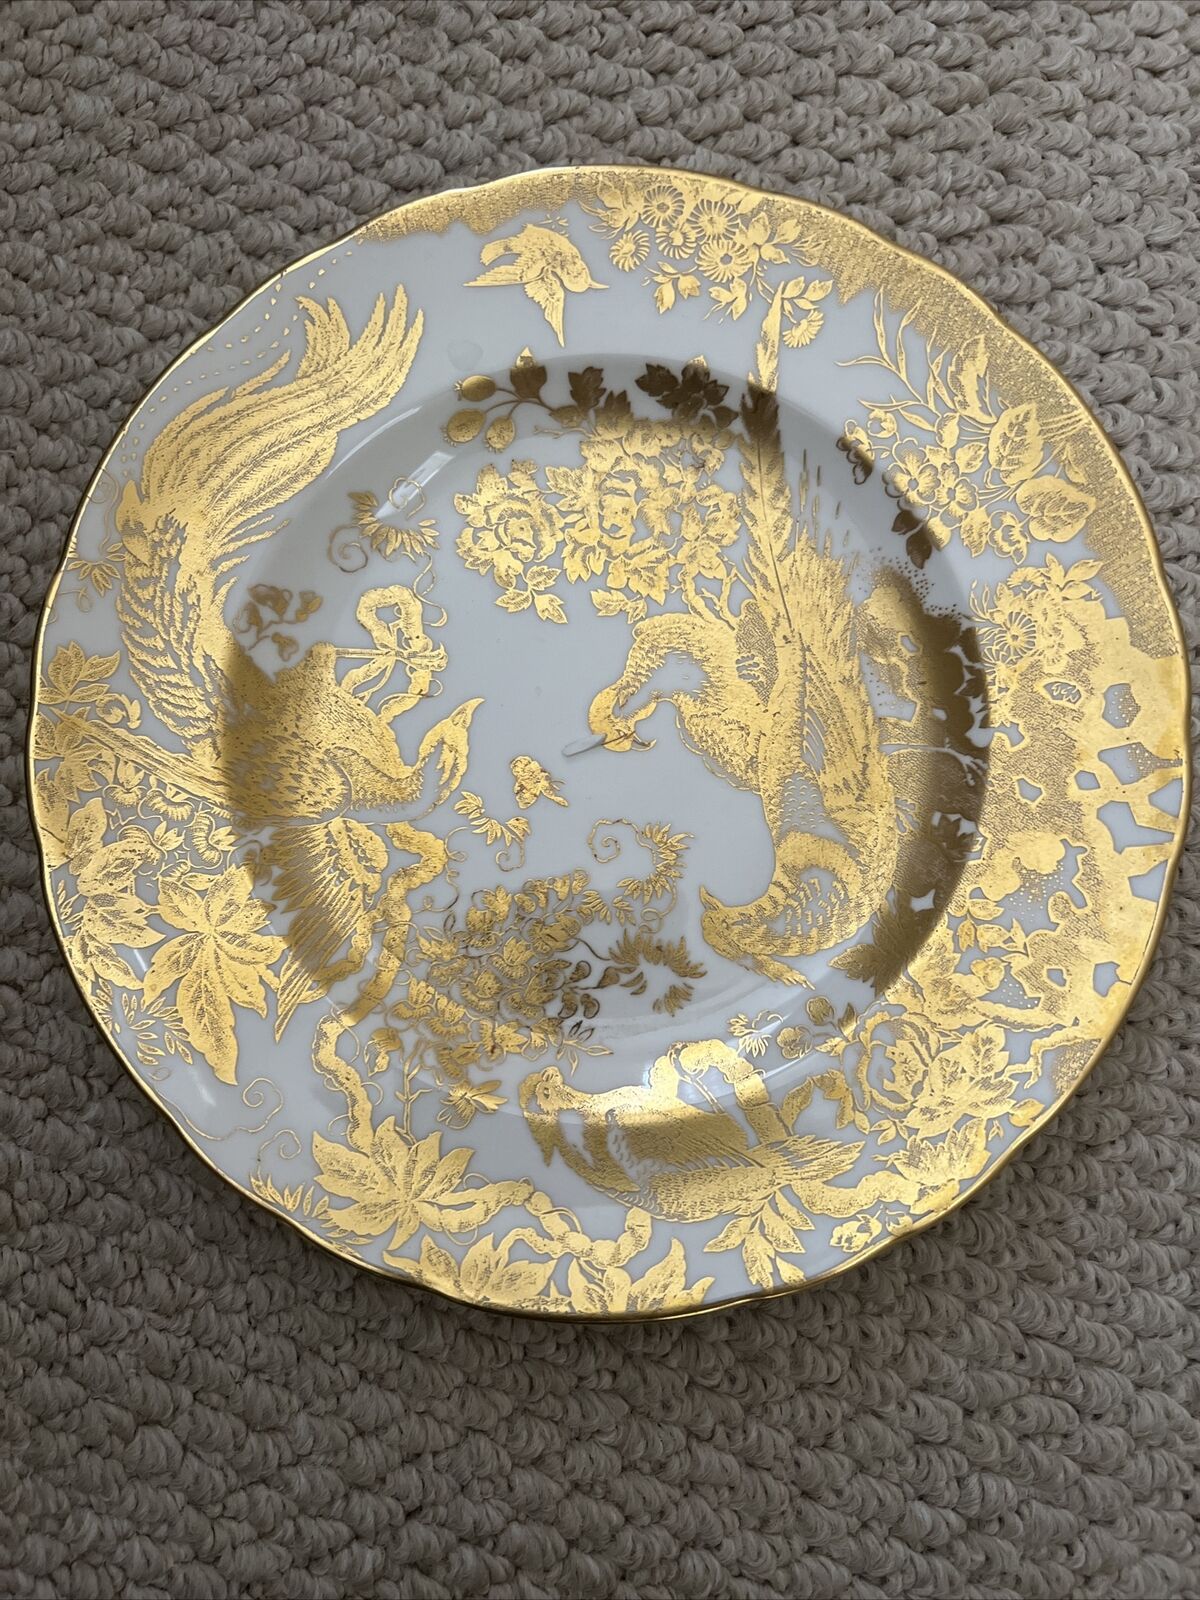 24 Carat Gold gold aves Royal Derby Breakfast 7.5 Inch Bread Plate